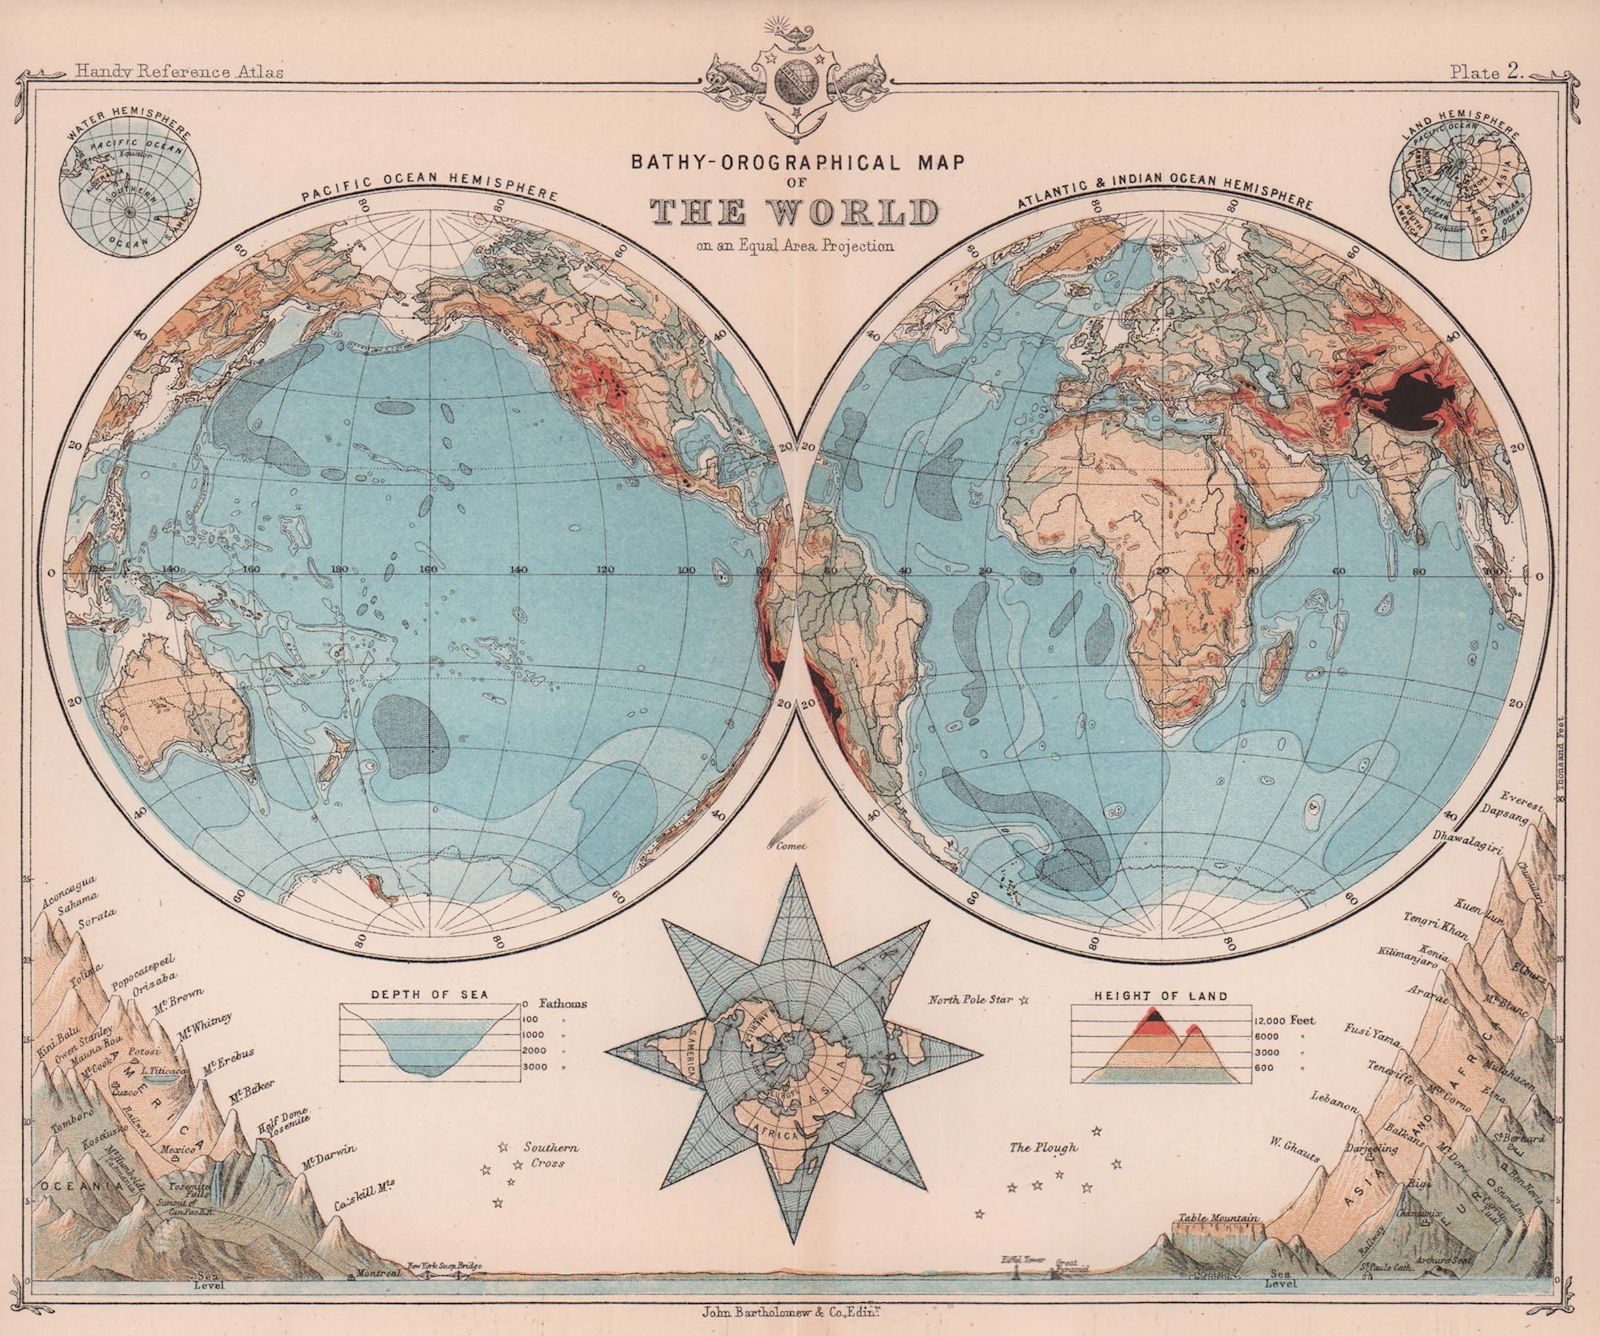 Associate Product Bathy-orographical map of the World. BARTHOLOMEW 1893 old antique chart